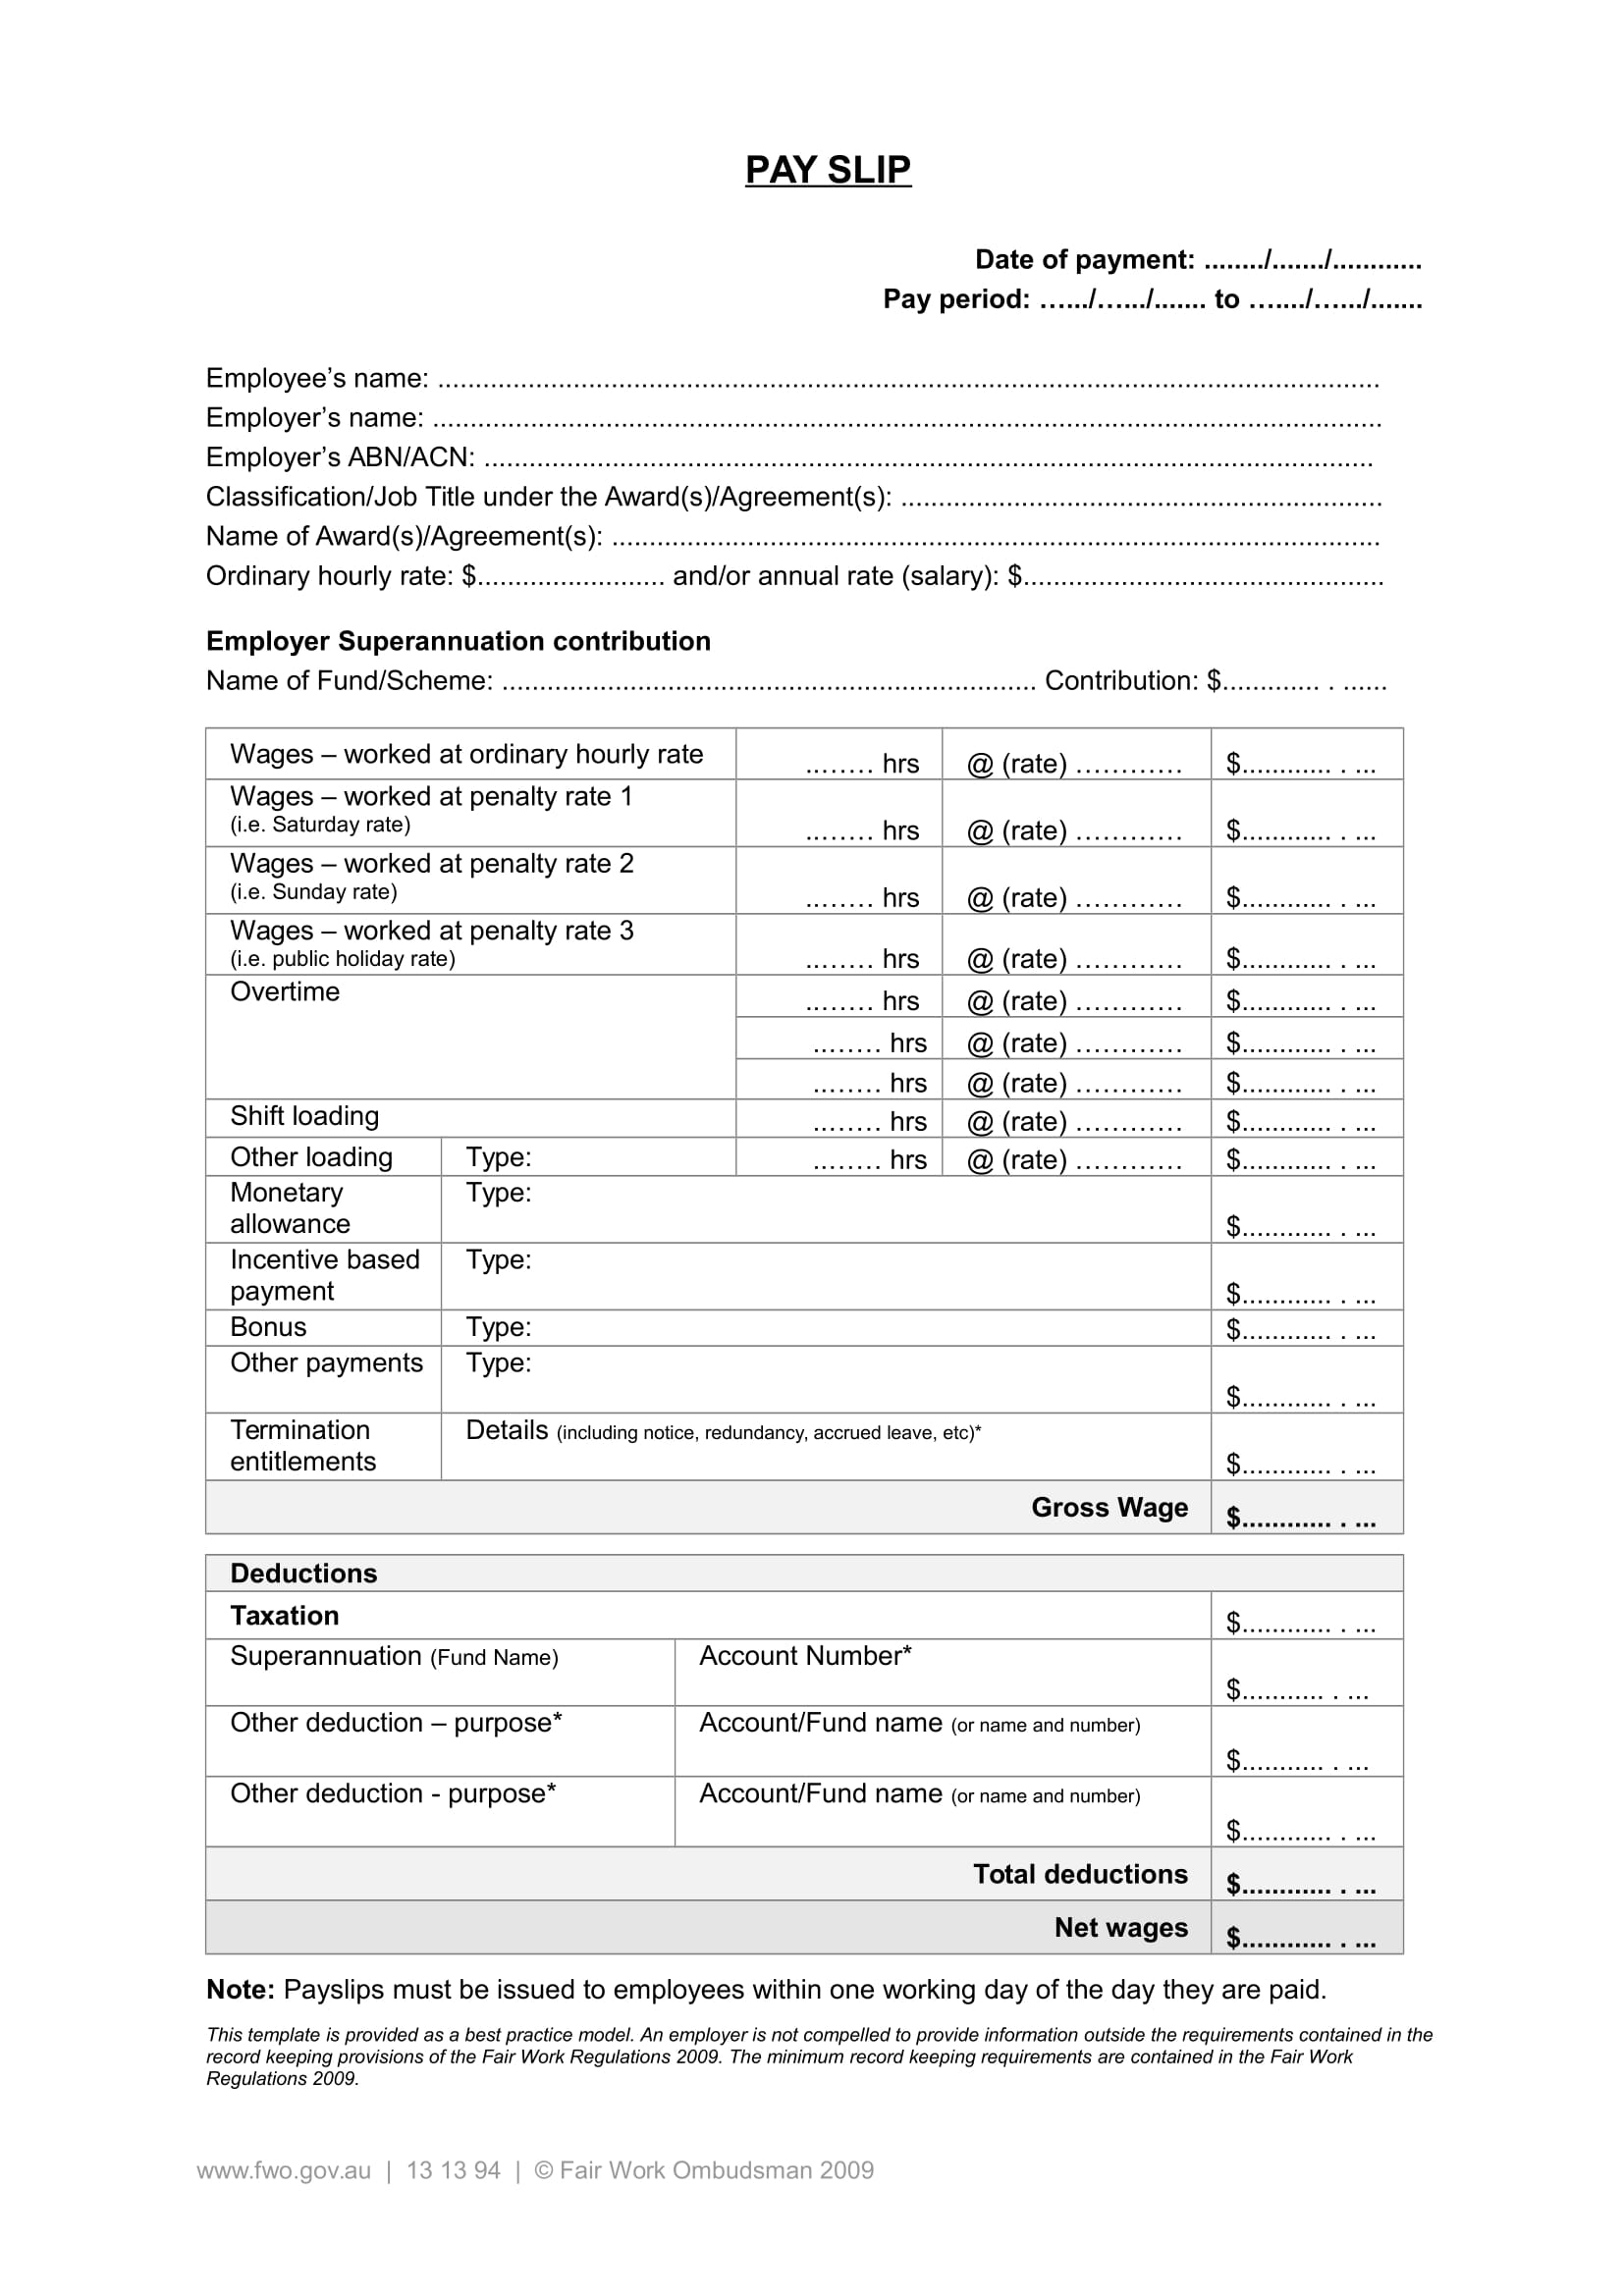 complete payslip template example